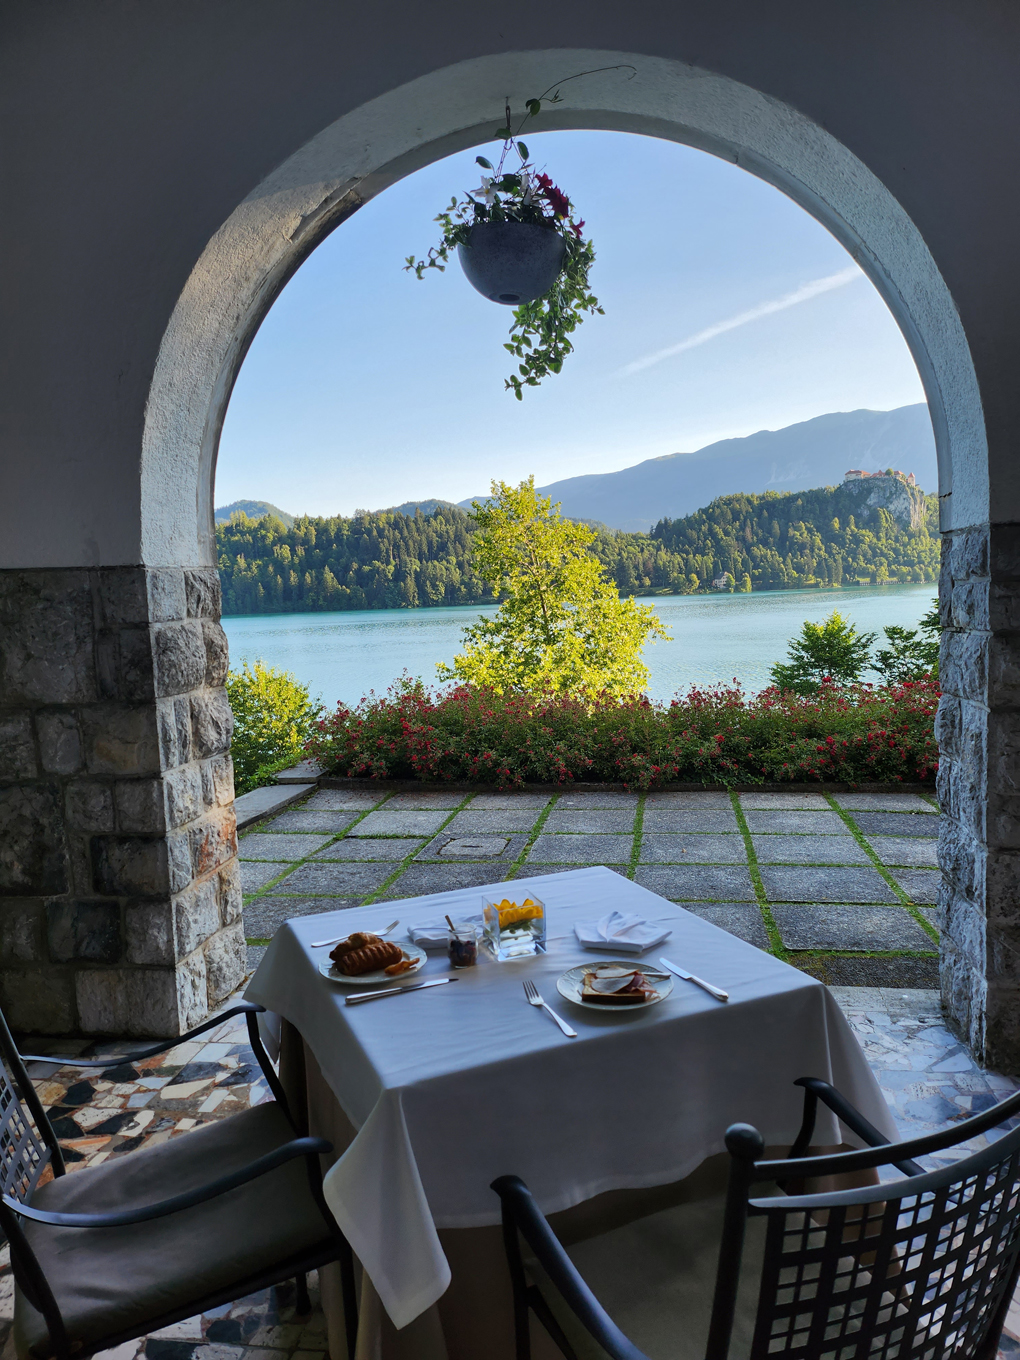 A table laid for breakfast is at the forefront just in front of an arch. Through the brick arch is a lake with an island. In the distance are mountains.